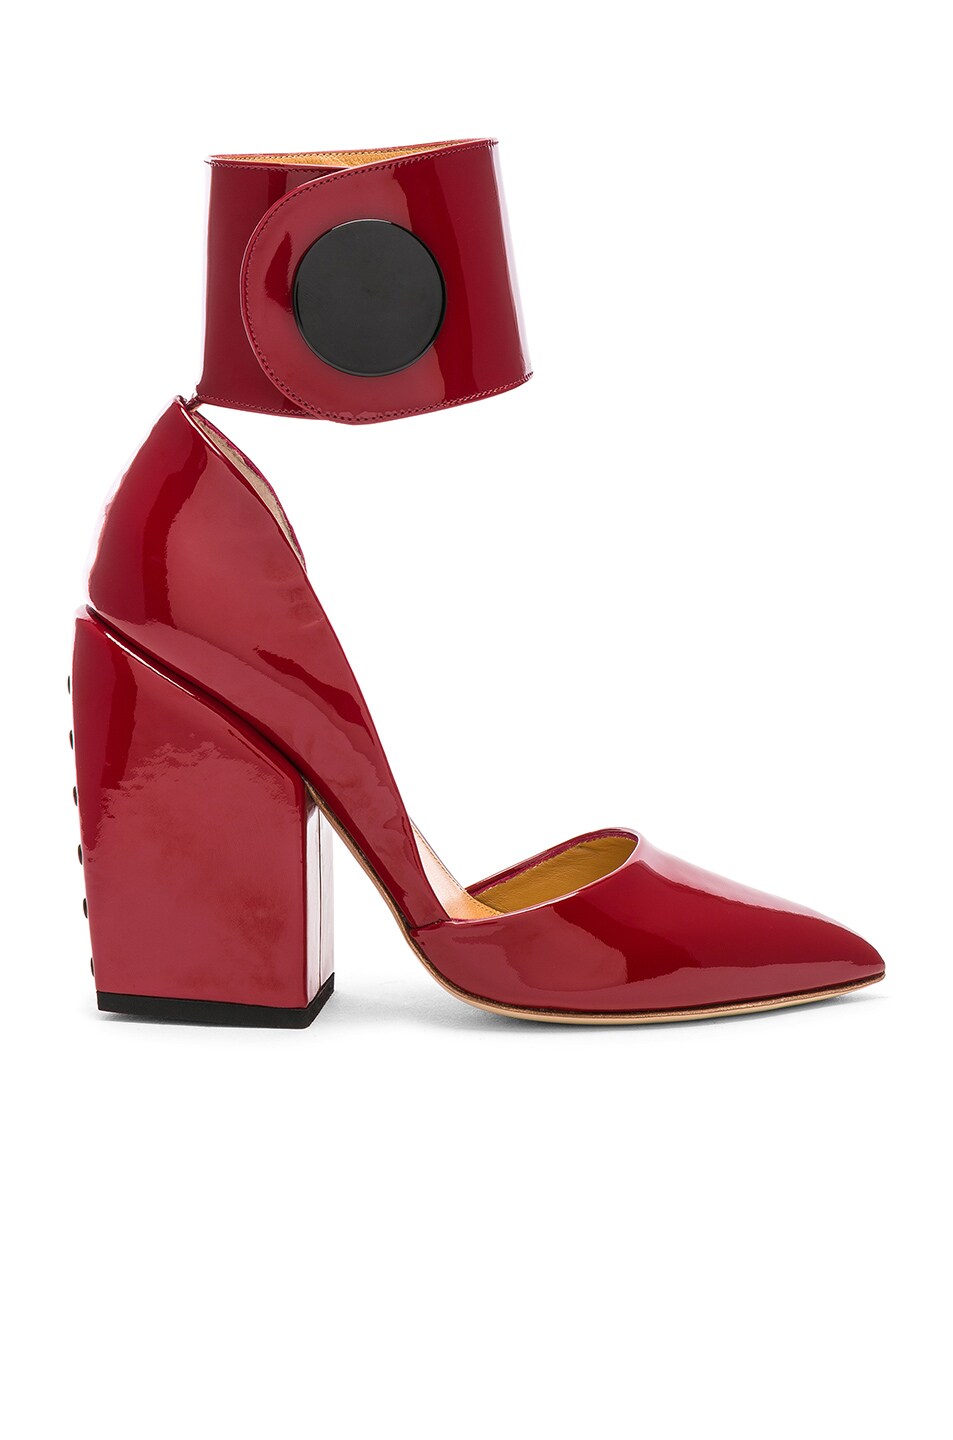 Image 1 of Petar Petrov Patent Leather Sally Toe Pumps in Red Patent & Black